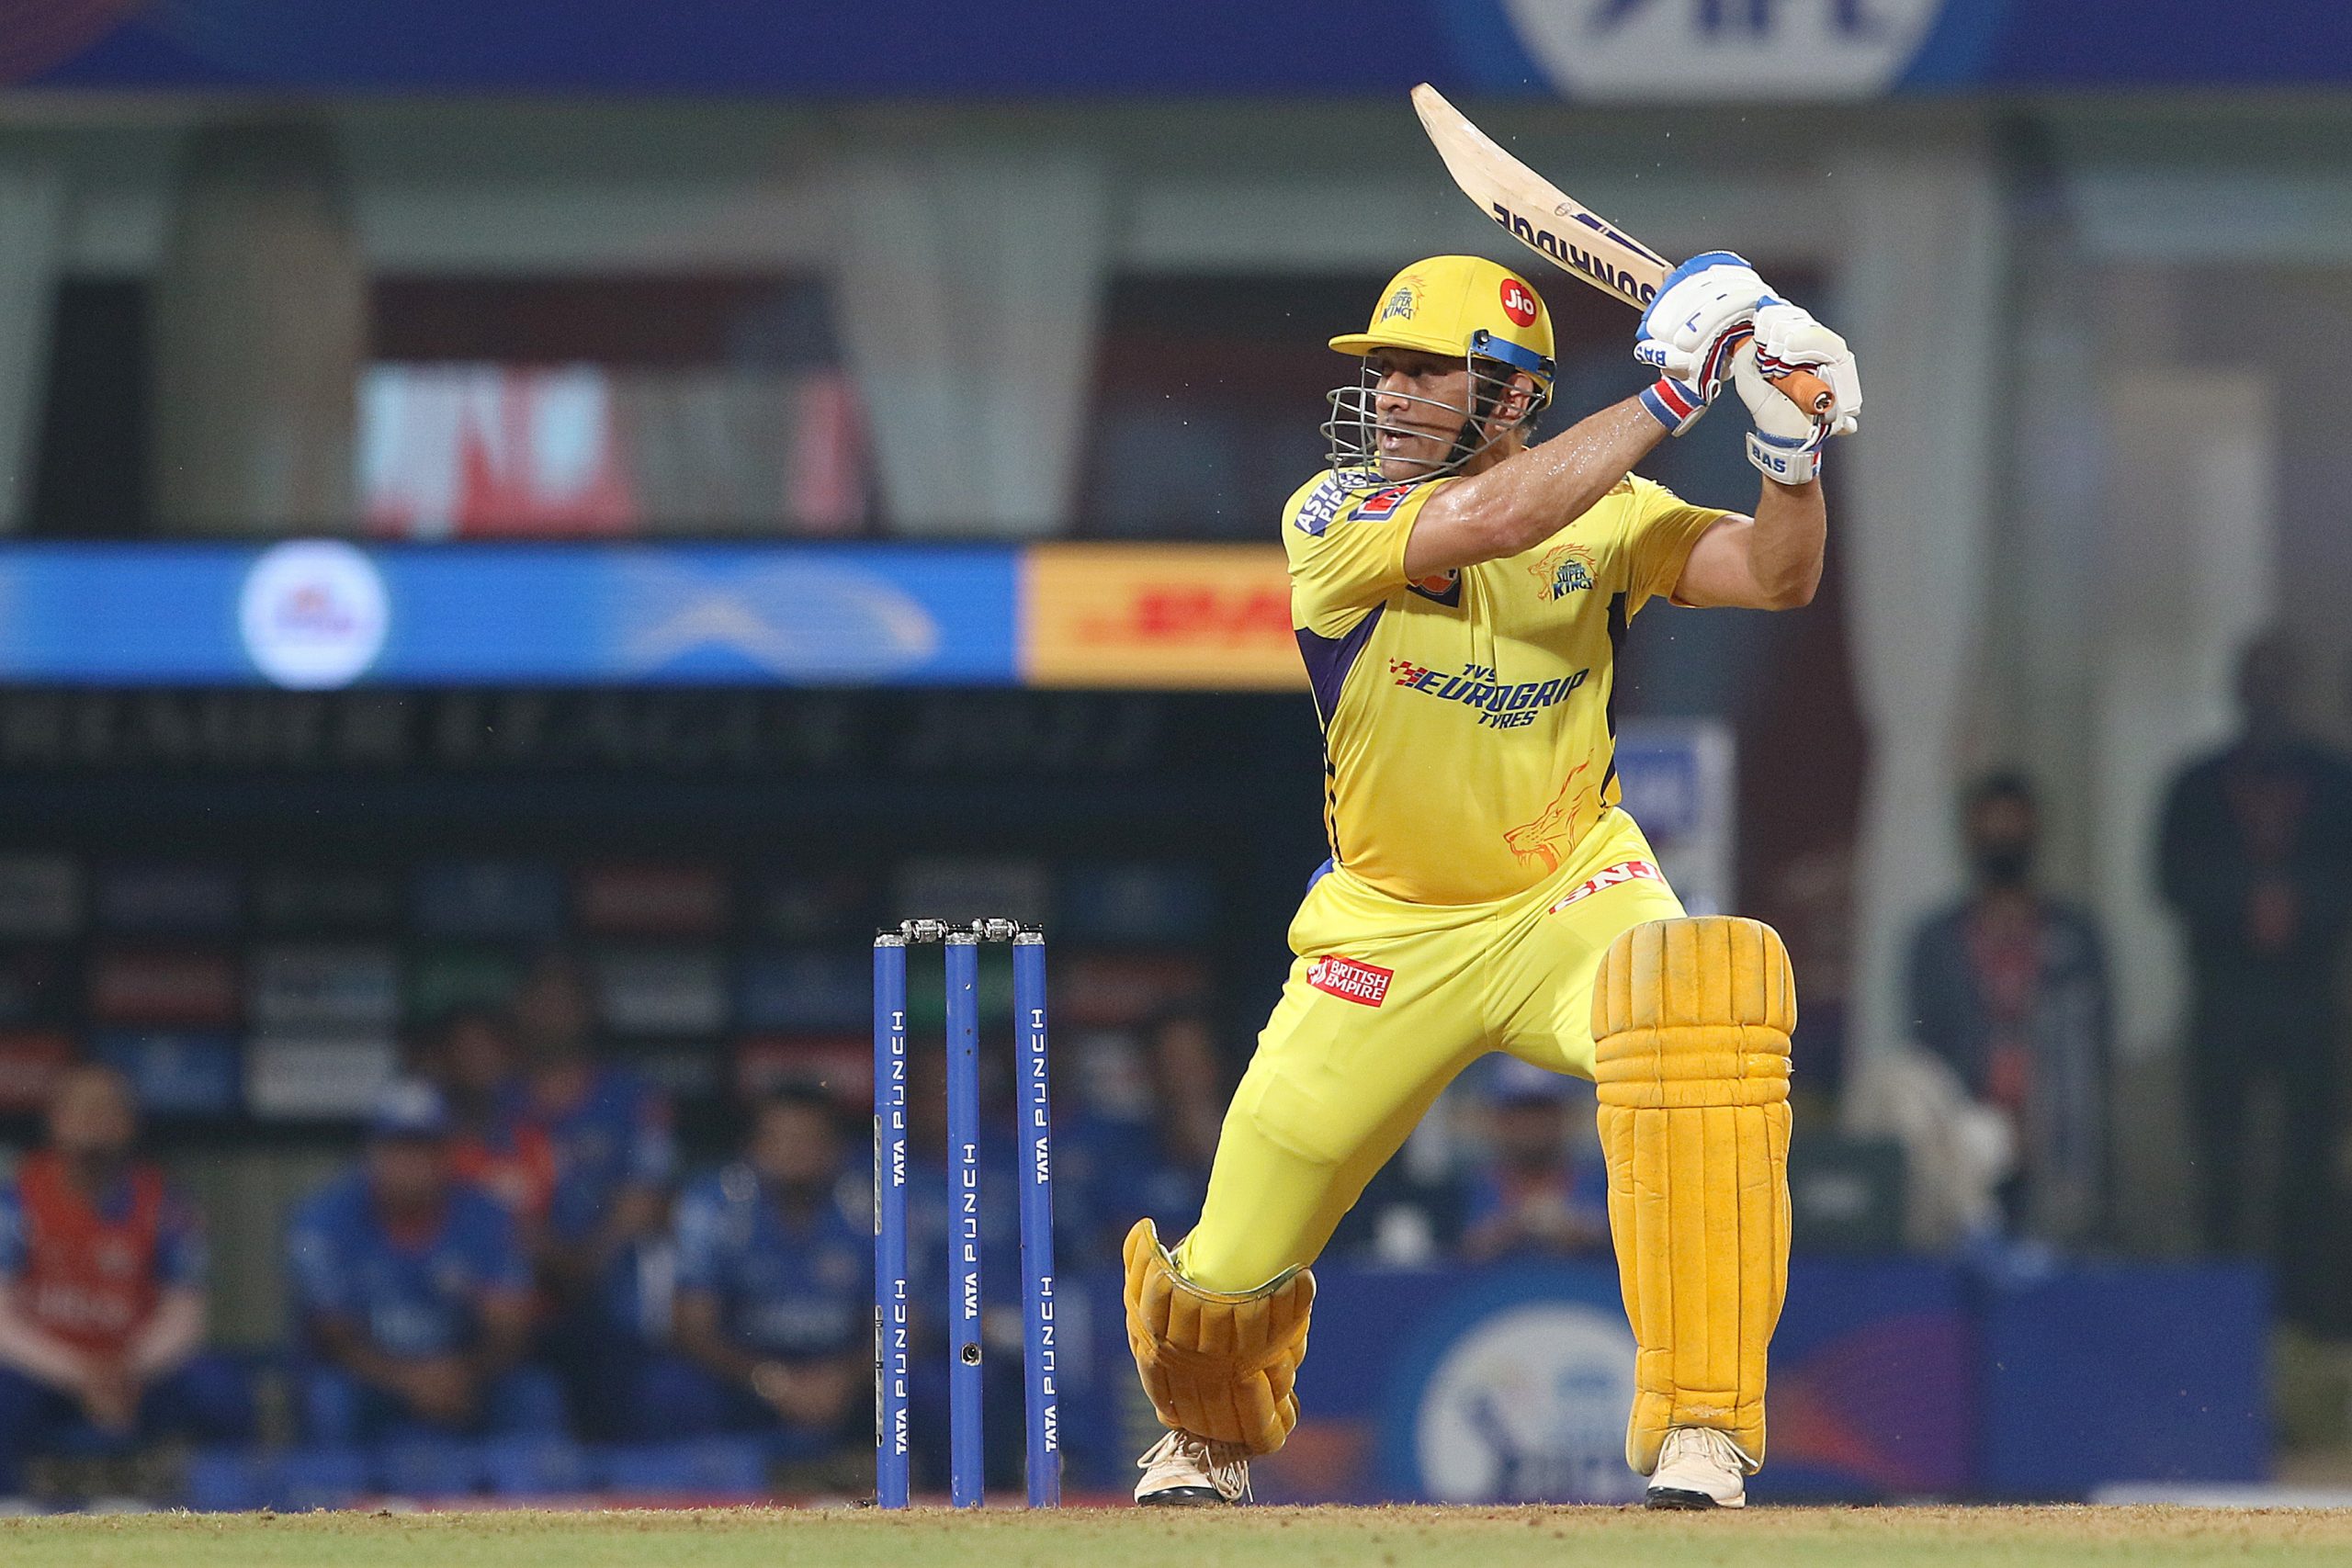 IPL 2022: Captain MS Dhoni back with bang; will CSK make a turn around?